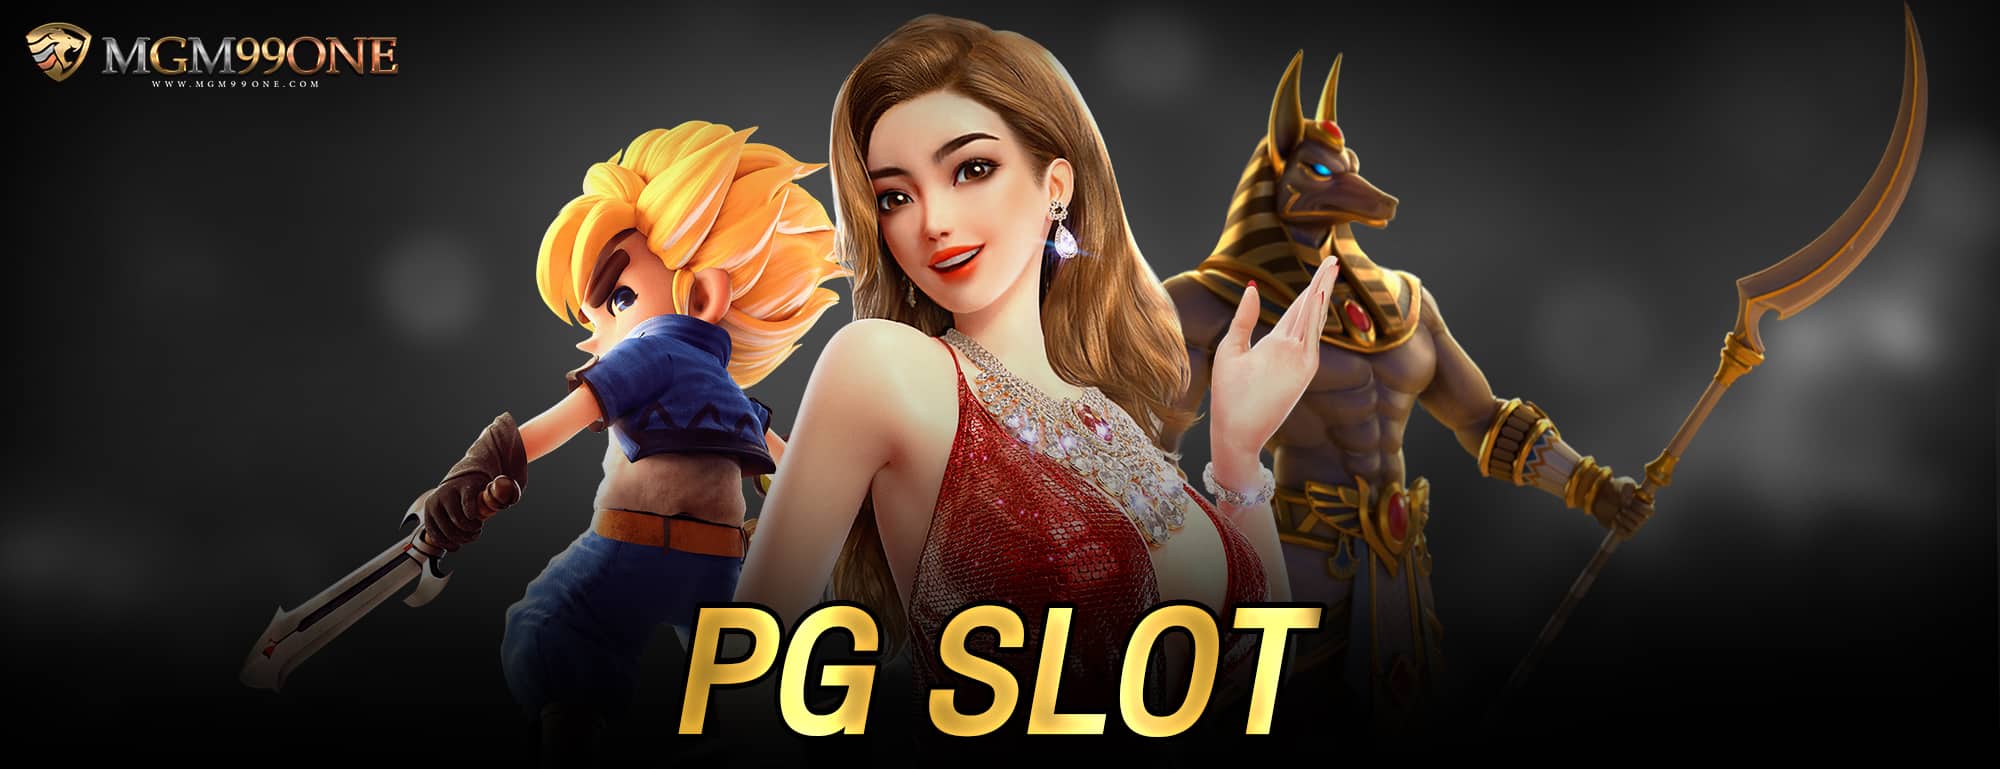 The recording game of pgslot on-line which might be trending this era